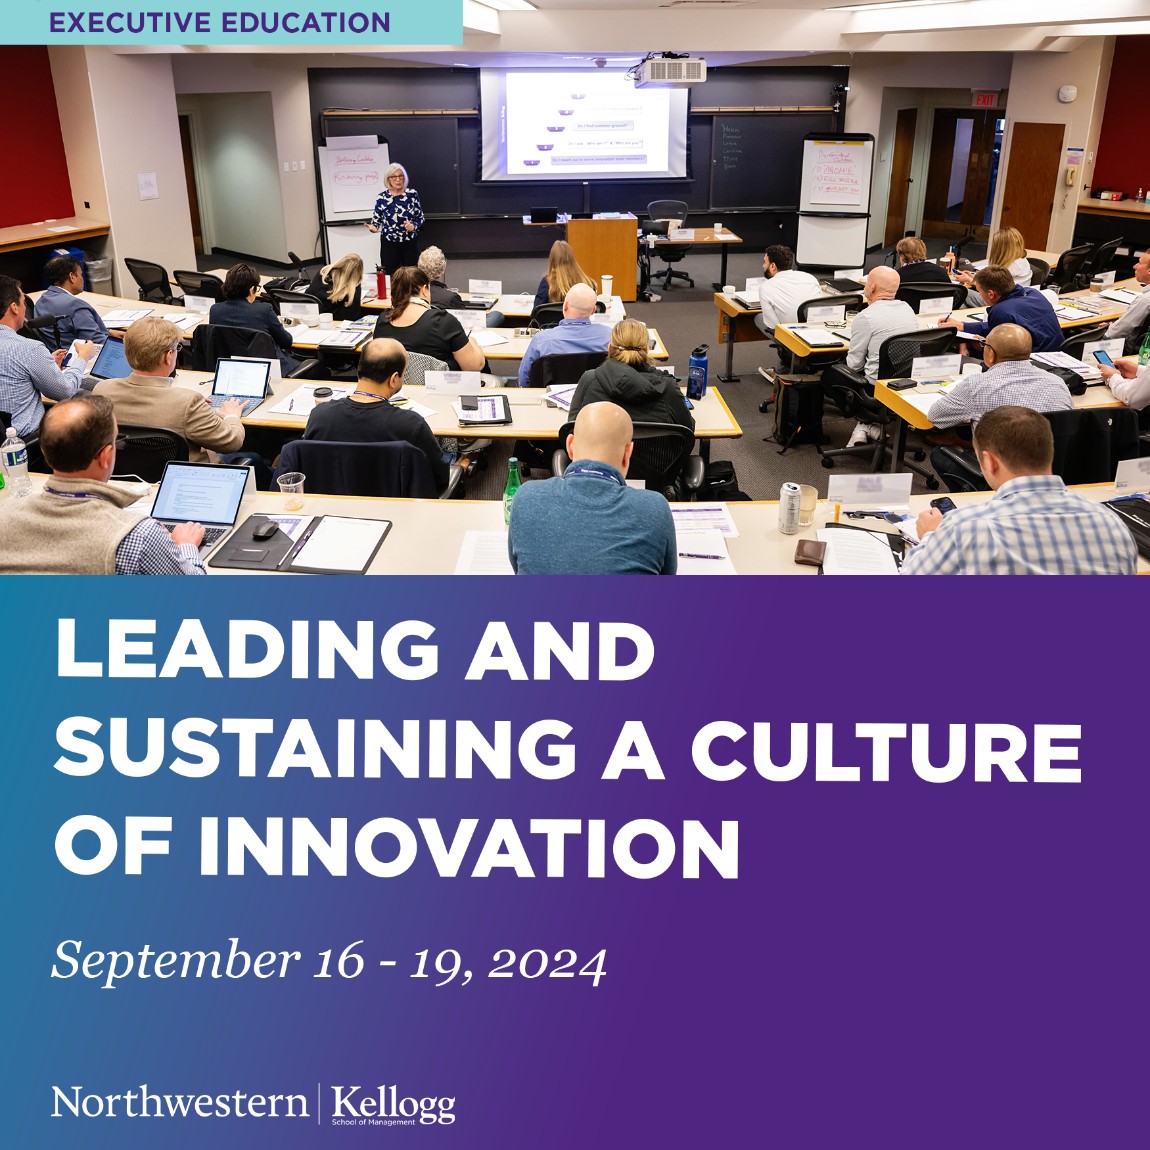 Innovation isn’t optional; it’s essential. In Leading and Sustaining a Culture of Innovation, learn how to create value for customers by designing modern business models, launching inventive services, and entering new markets. Join us on September 16: kell.gg/tinnovate